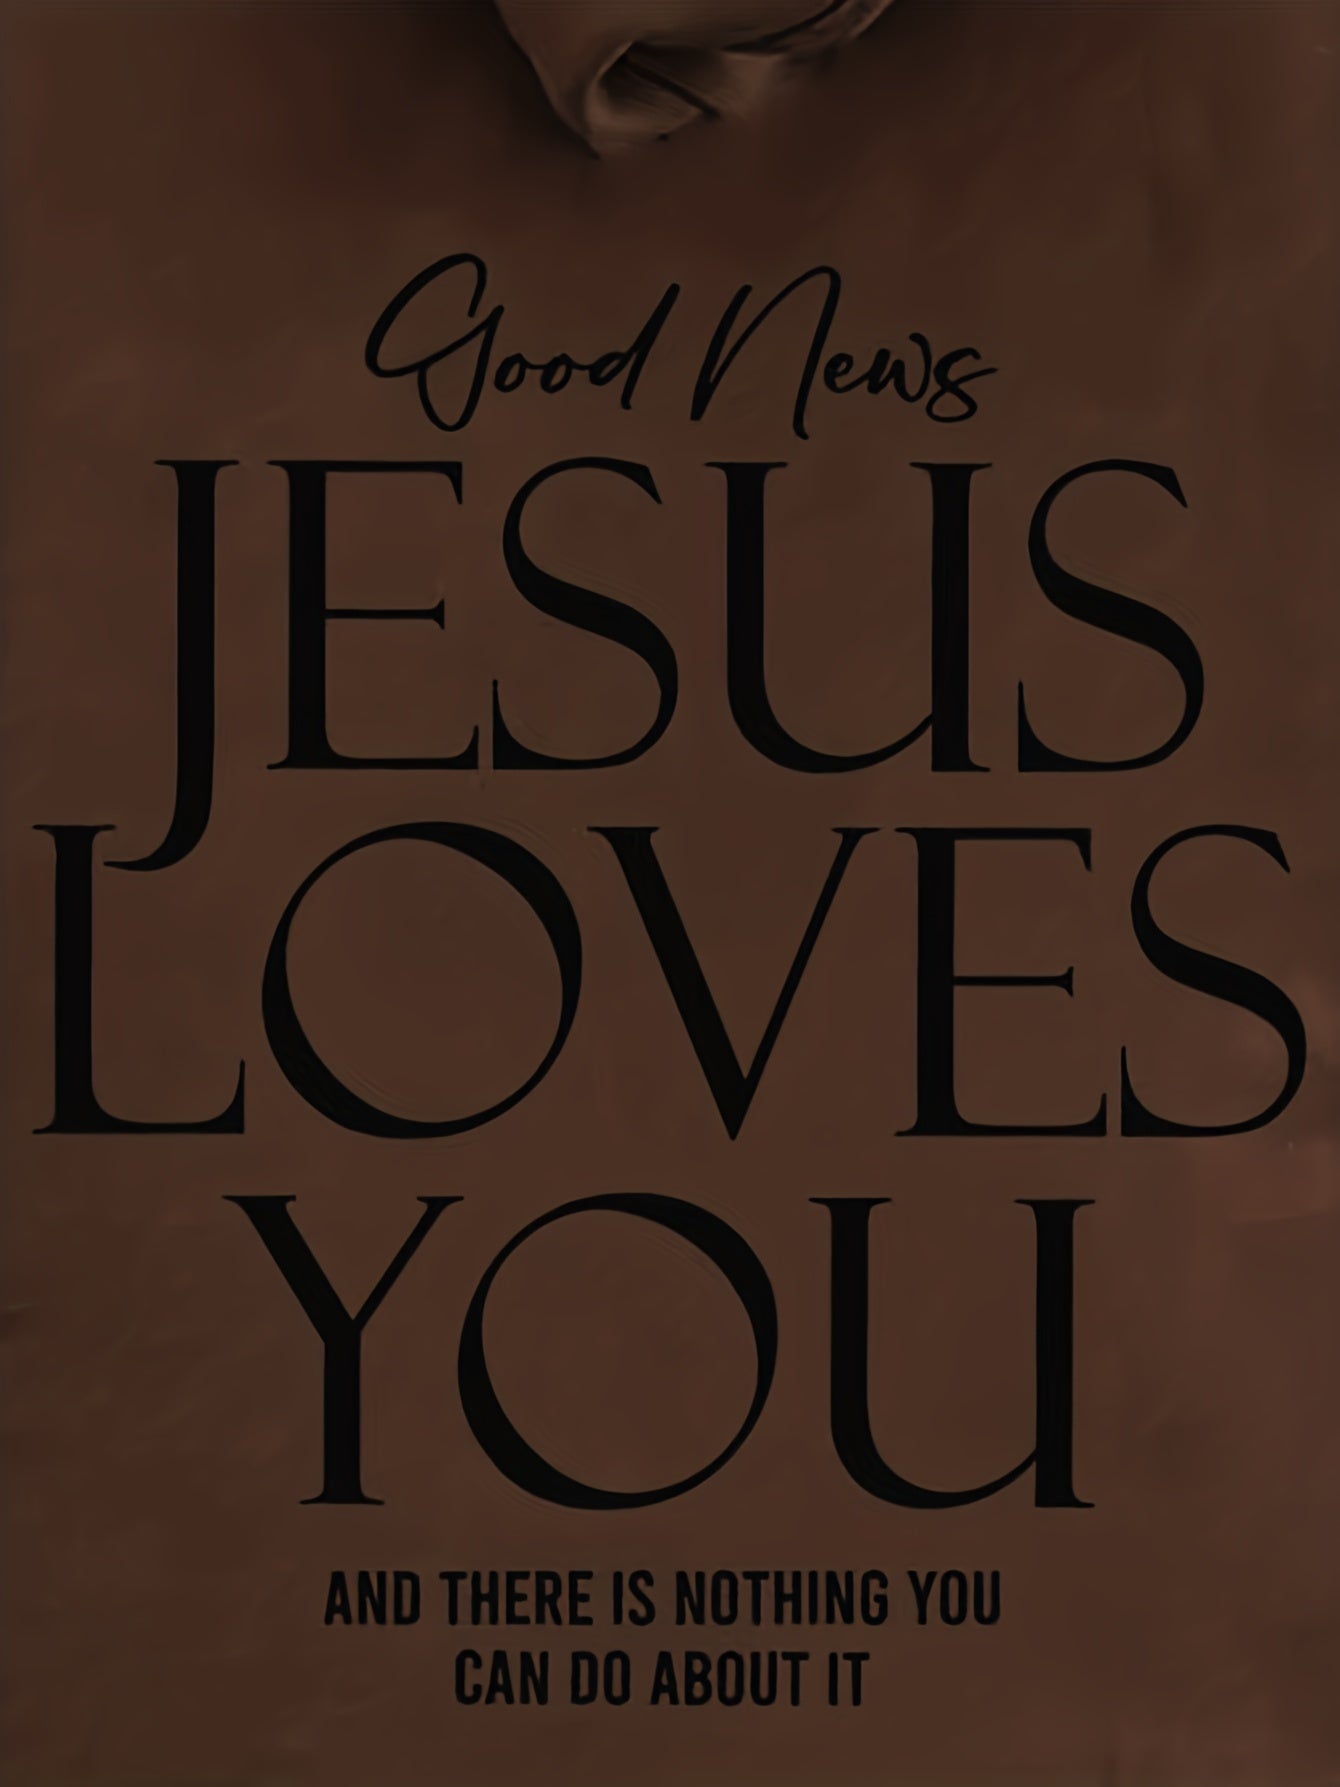 Good News Jesus Loves You  And There's Nothing You Can Do About It Plus Size Women's Christian Pullover Hooded Sweatshirt claimedbygoddesigns